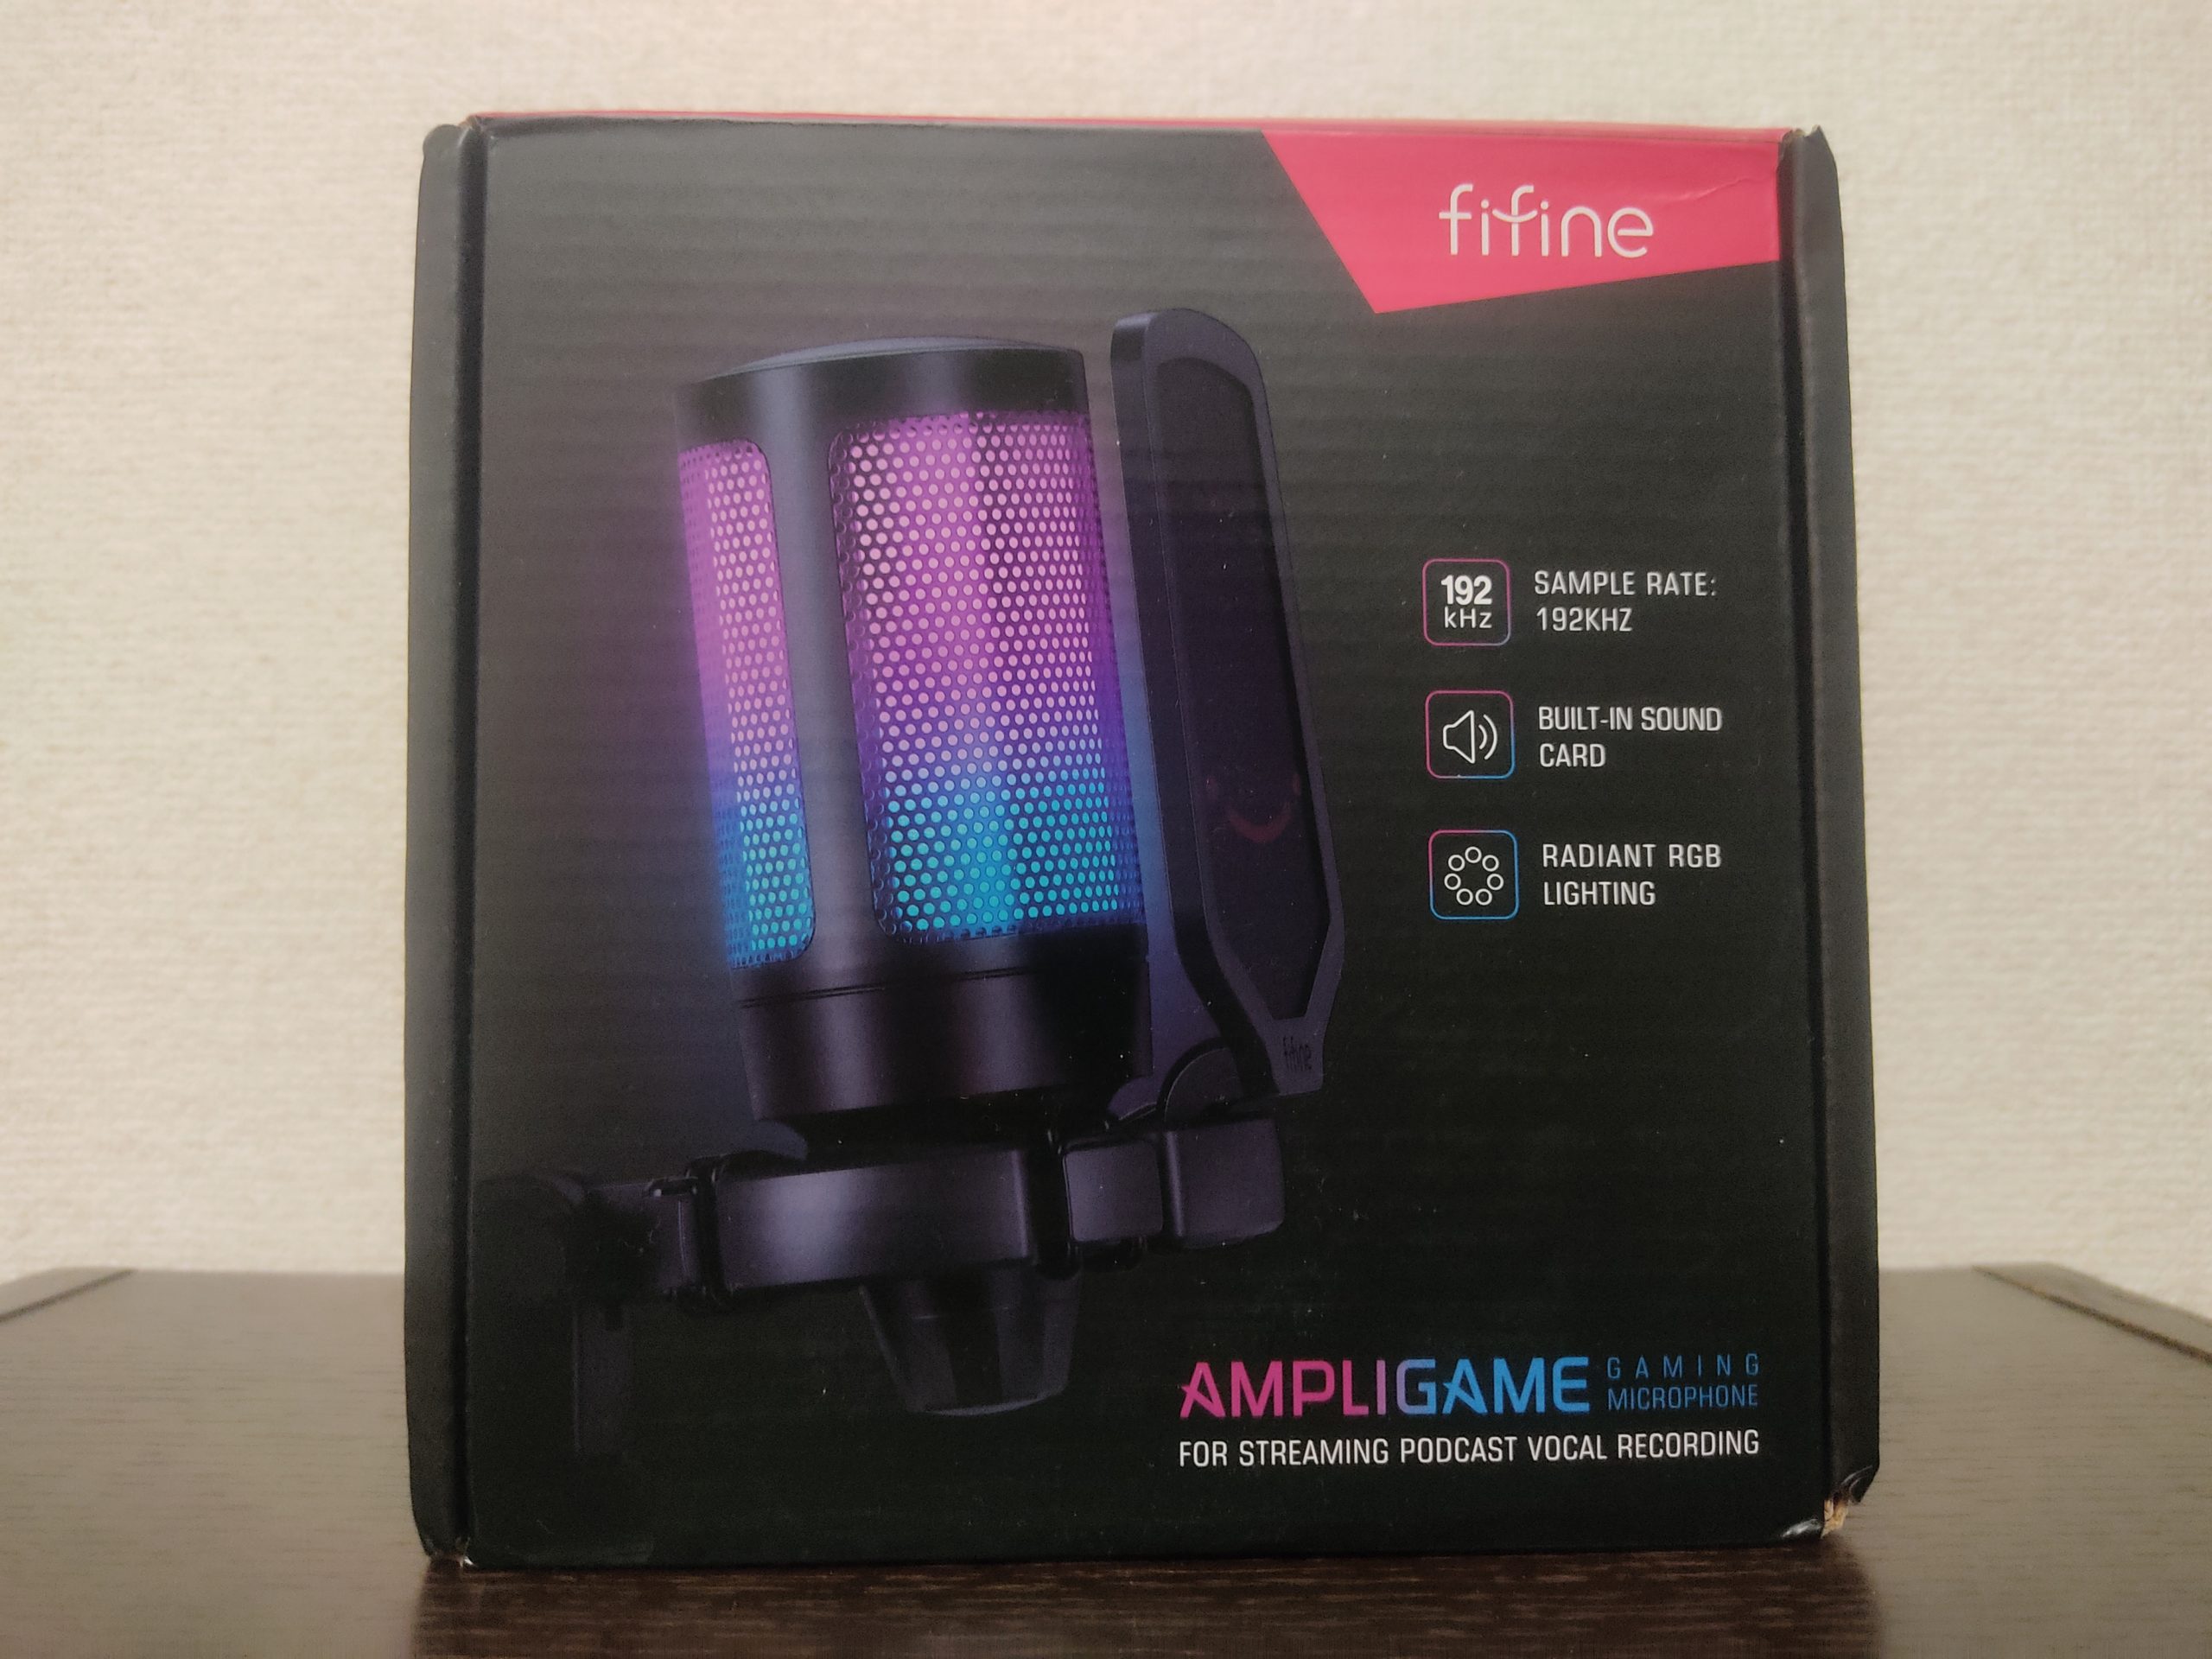 「FIFINE AmpliGame A6Vマイク」の製品パッケージ